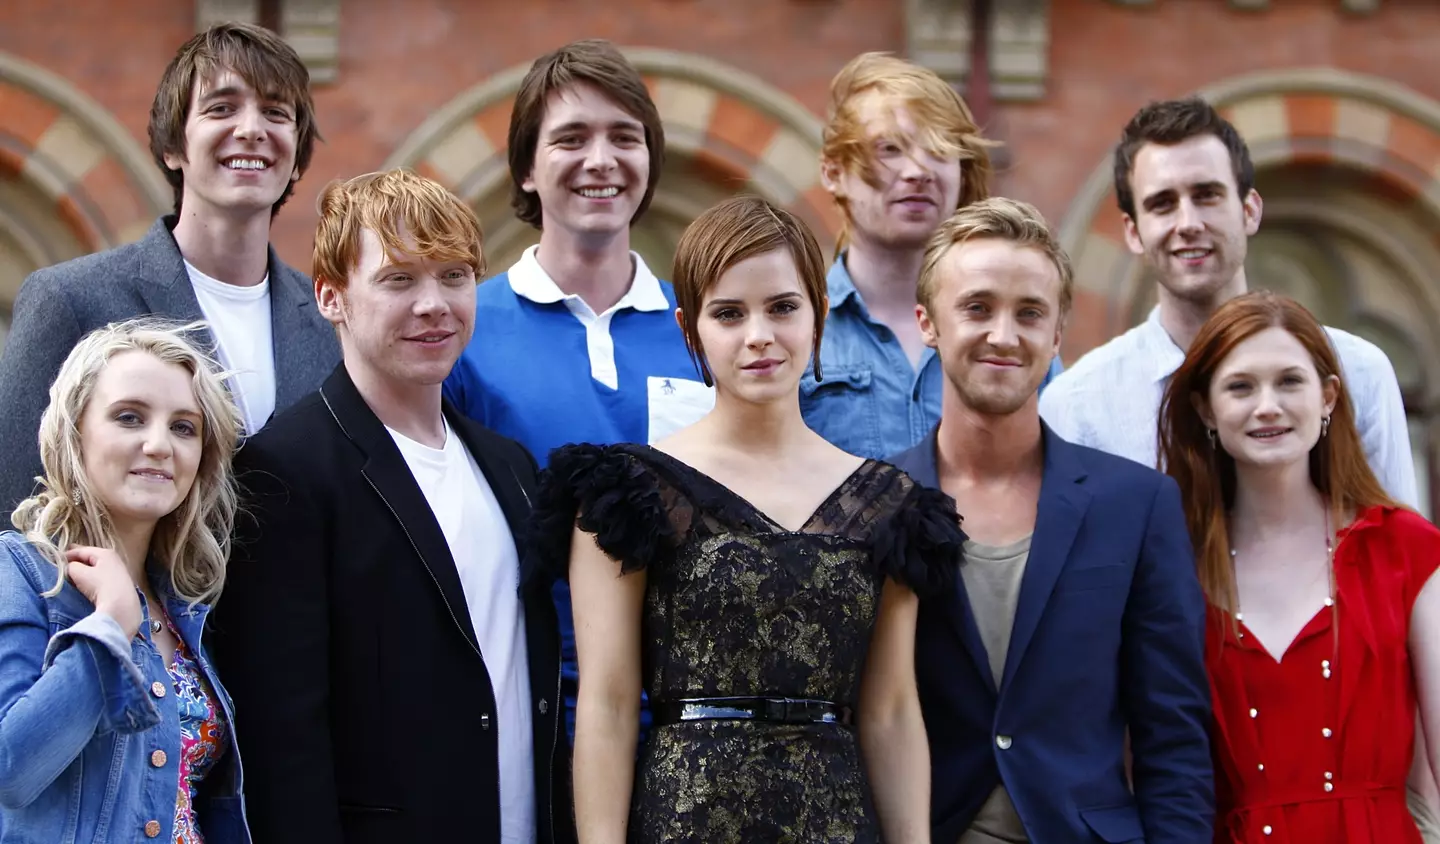 The Harry Potter cast has remained close (